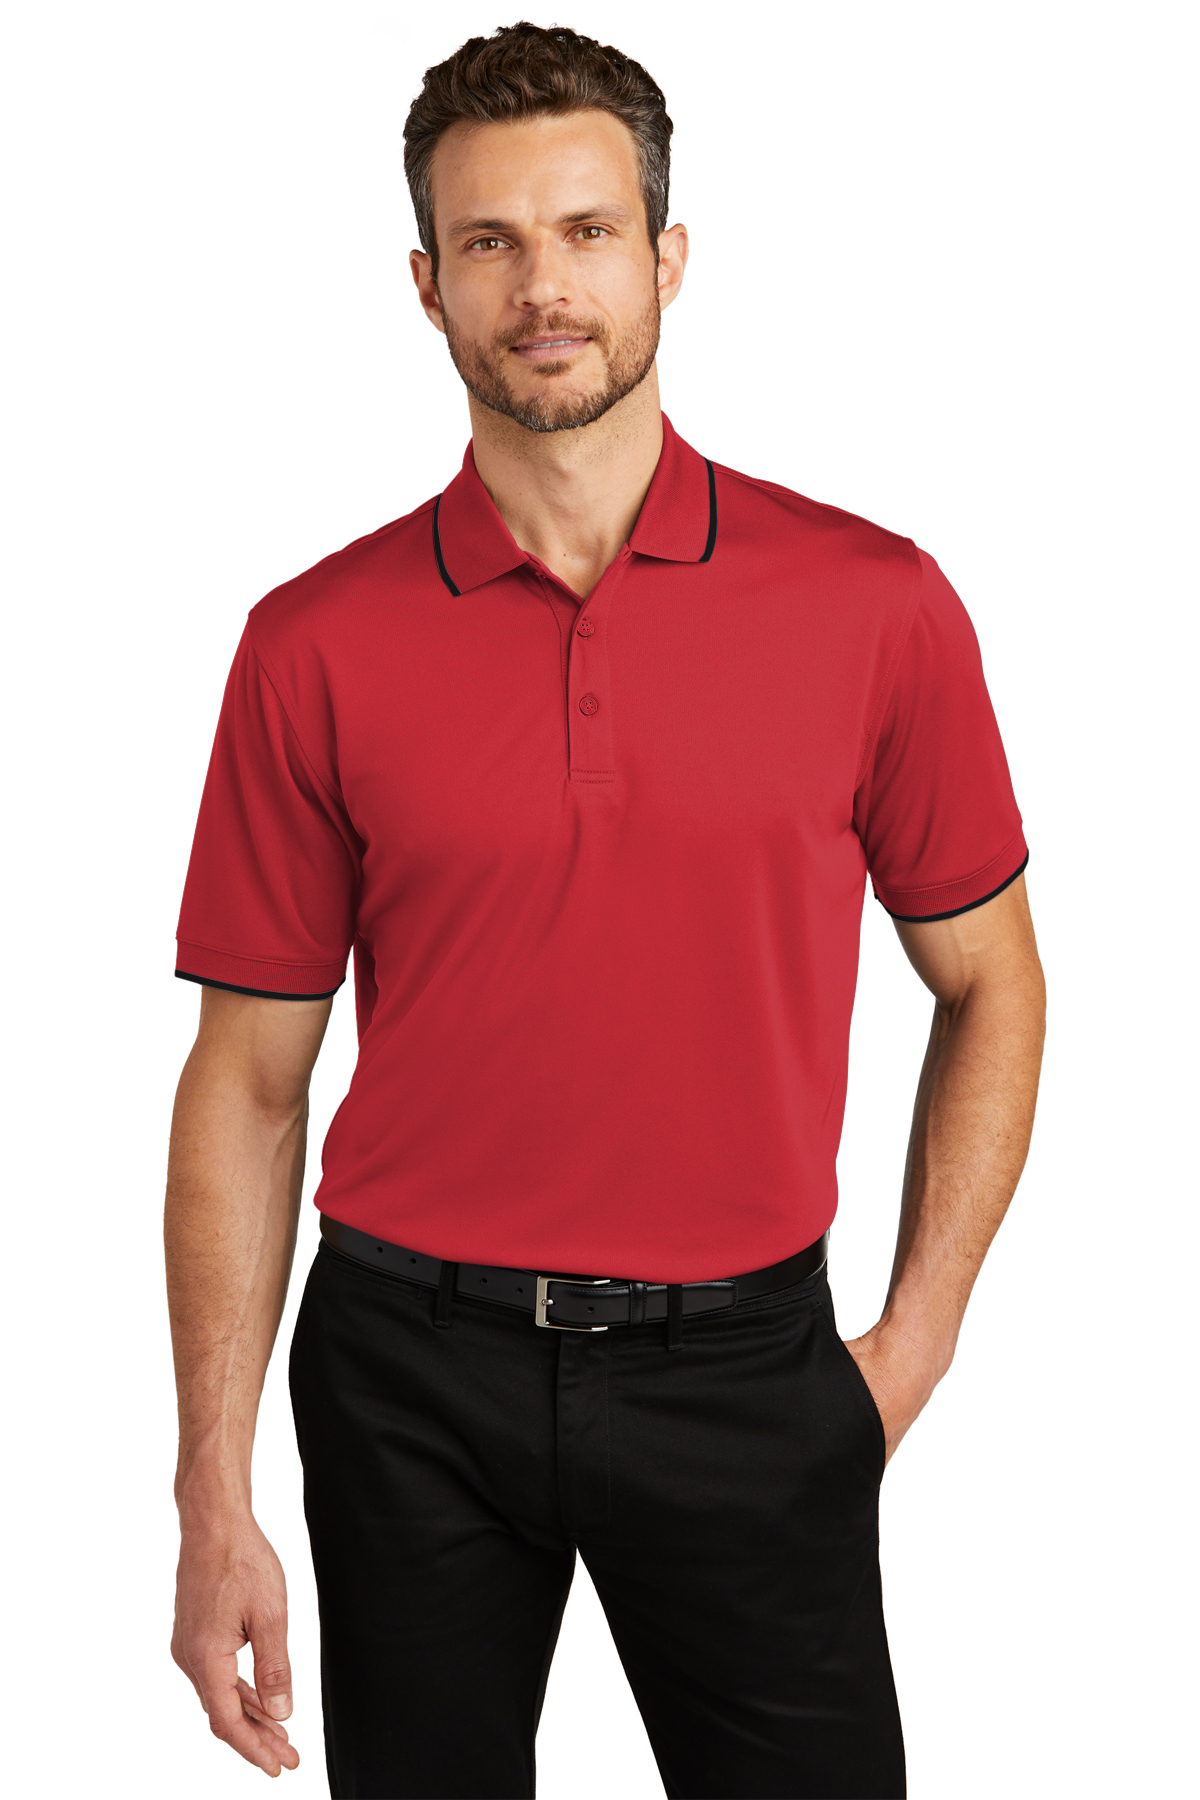 Port Authority ® Dry Zone ® UV Micro-Mesh Tipped Polo | Product | Port ...